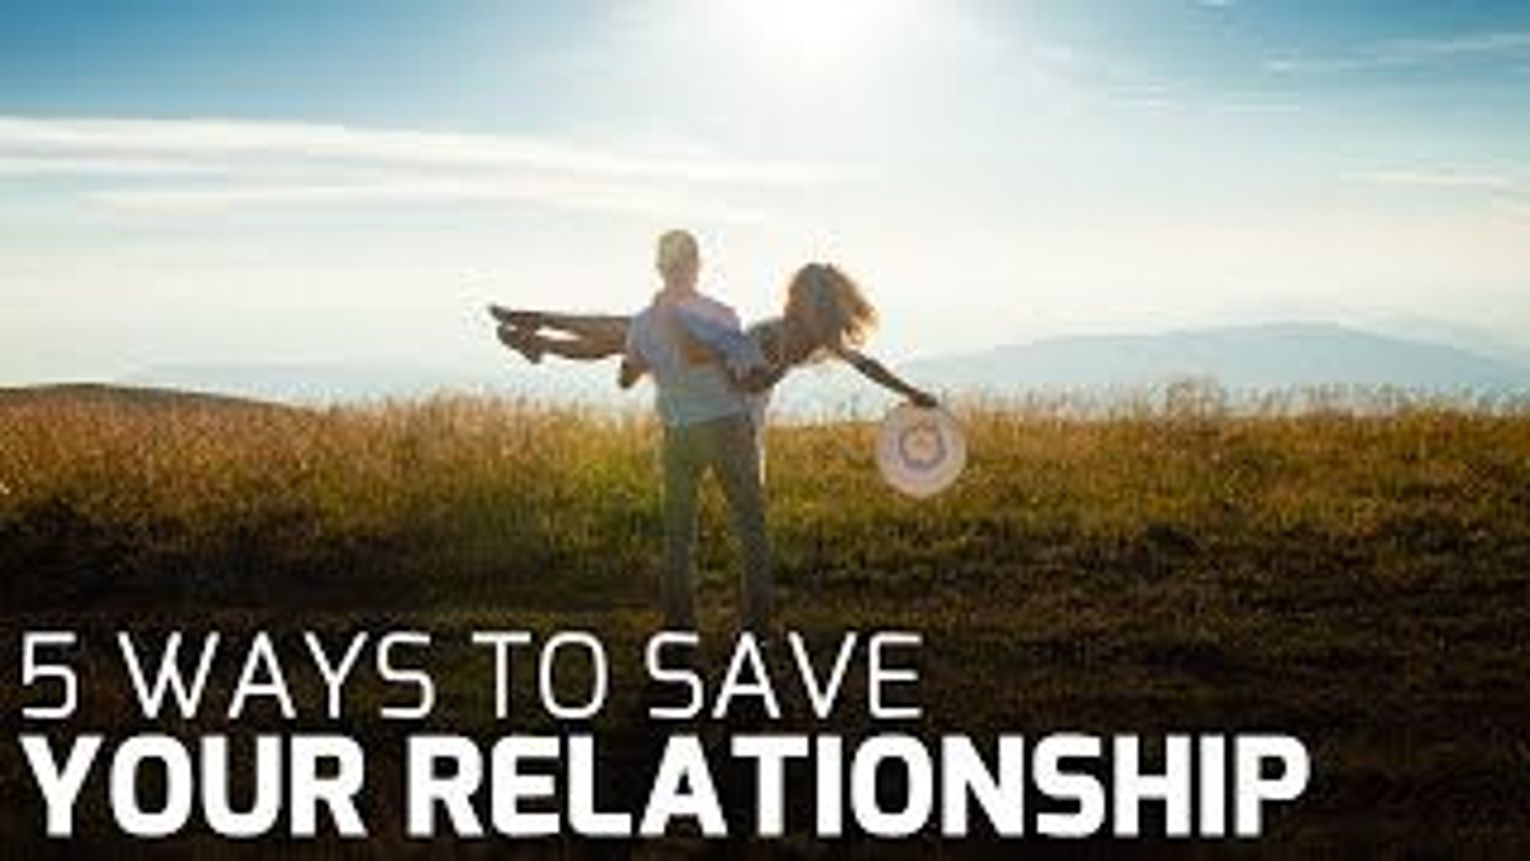 5 Ways to Get Your Relationship Back on Track